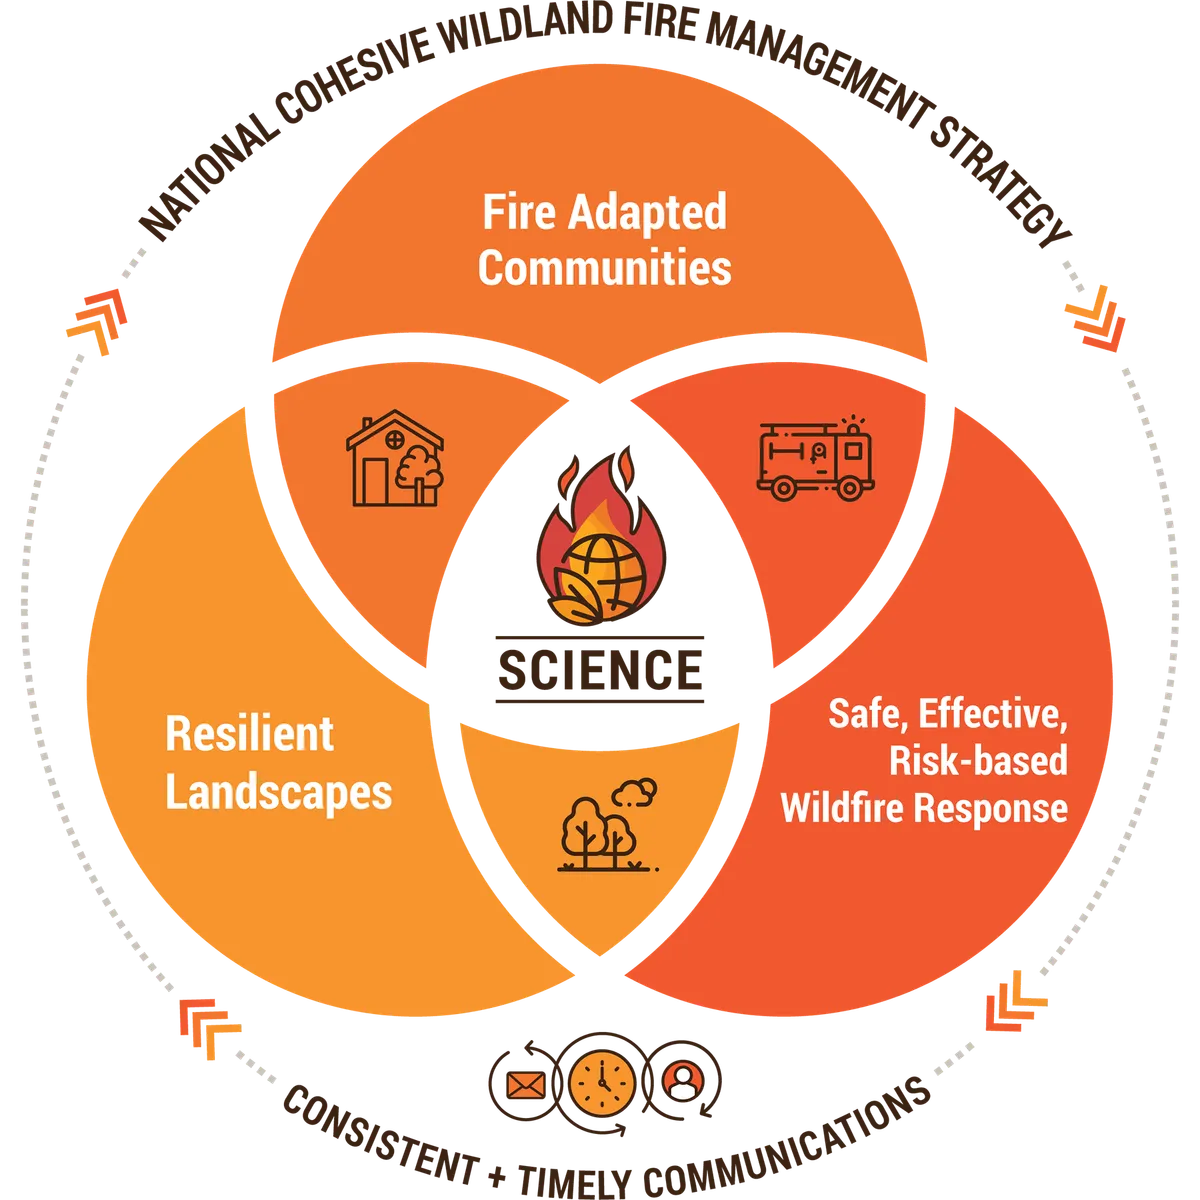 National Cohesive Wildland Fire Management Strategy